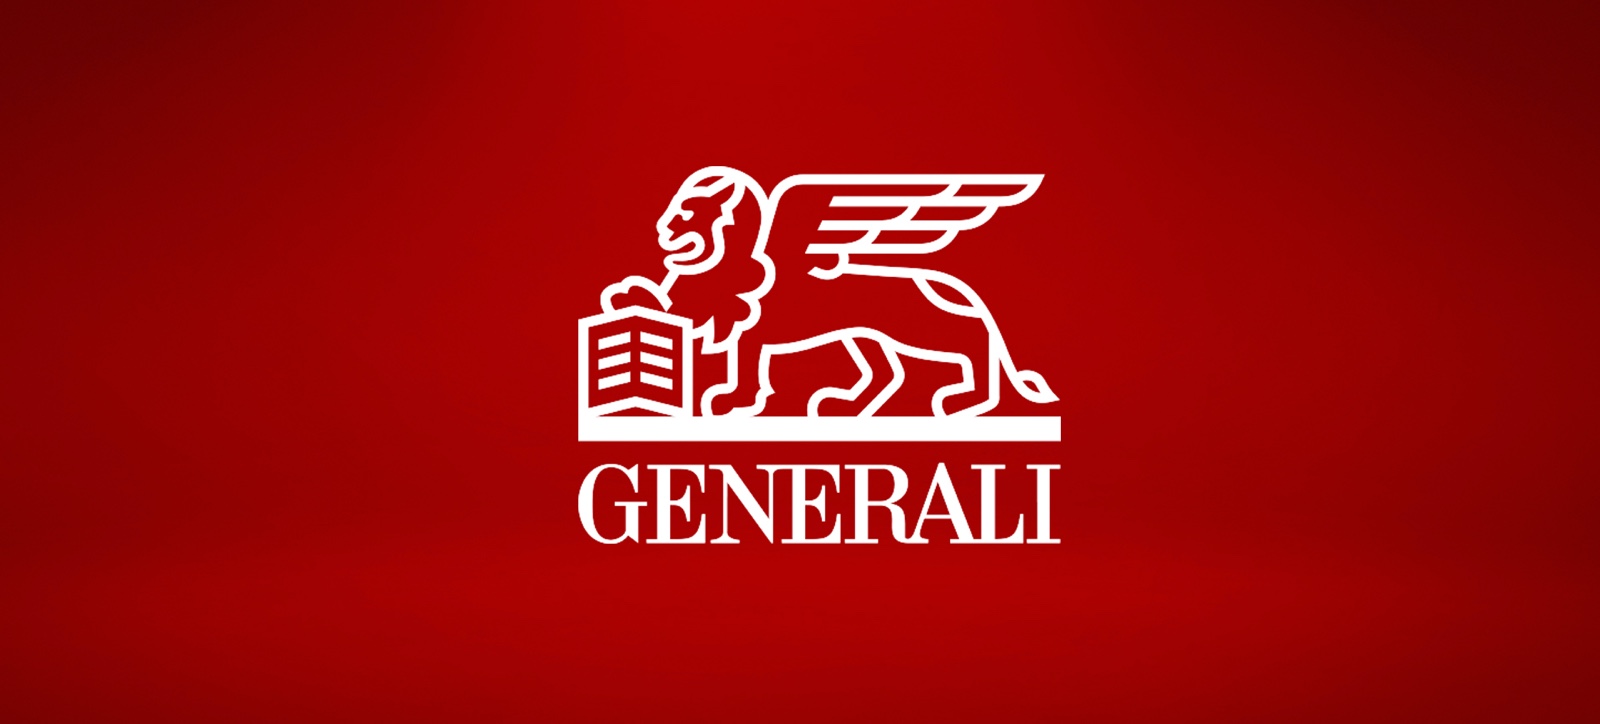 GENERALI: FITCH CONFIRMED IFS RATING AT 'A-' LEVEL